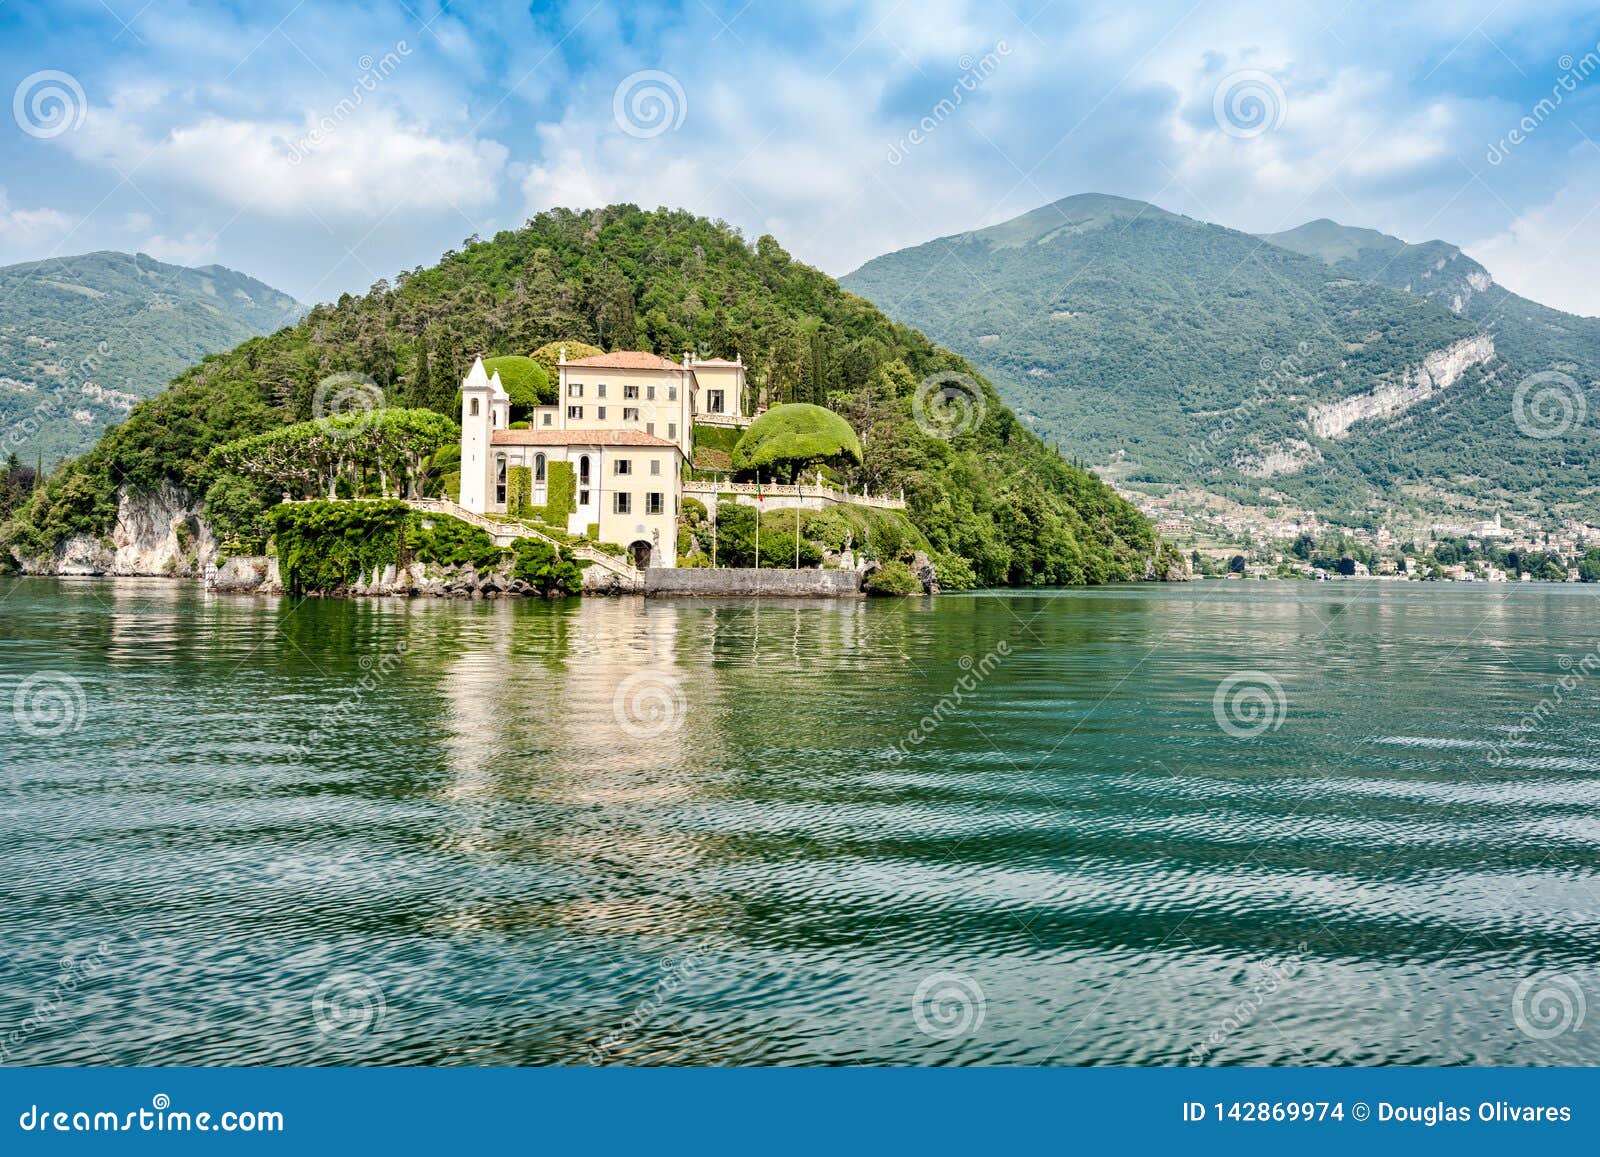 the most beautiful lake on the world lago como. lombardy, italy